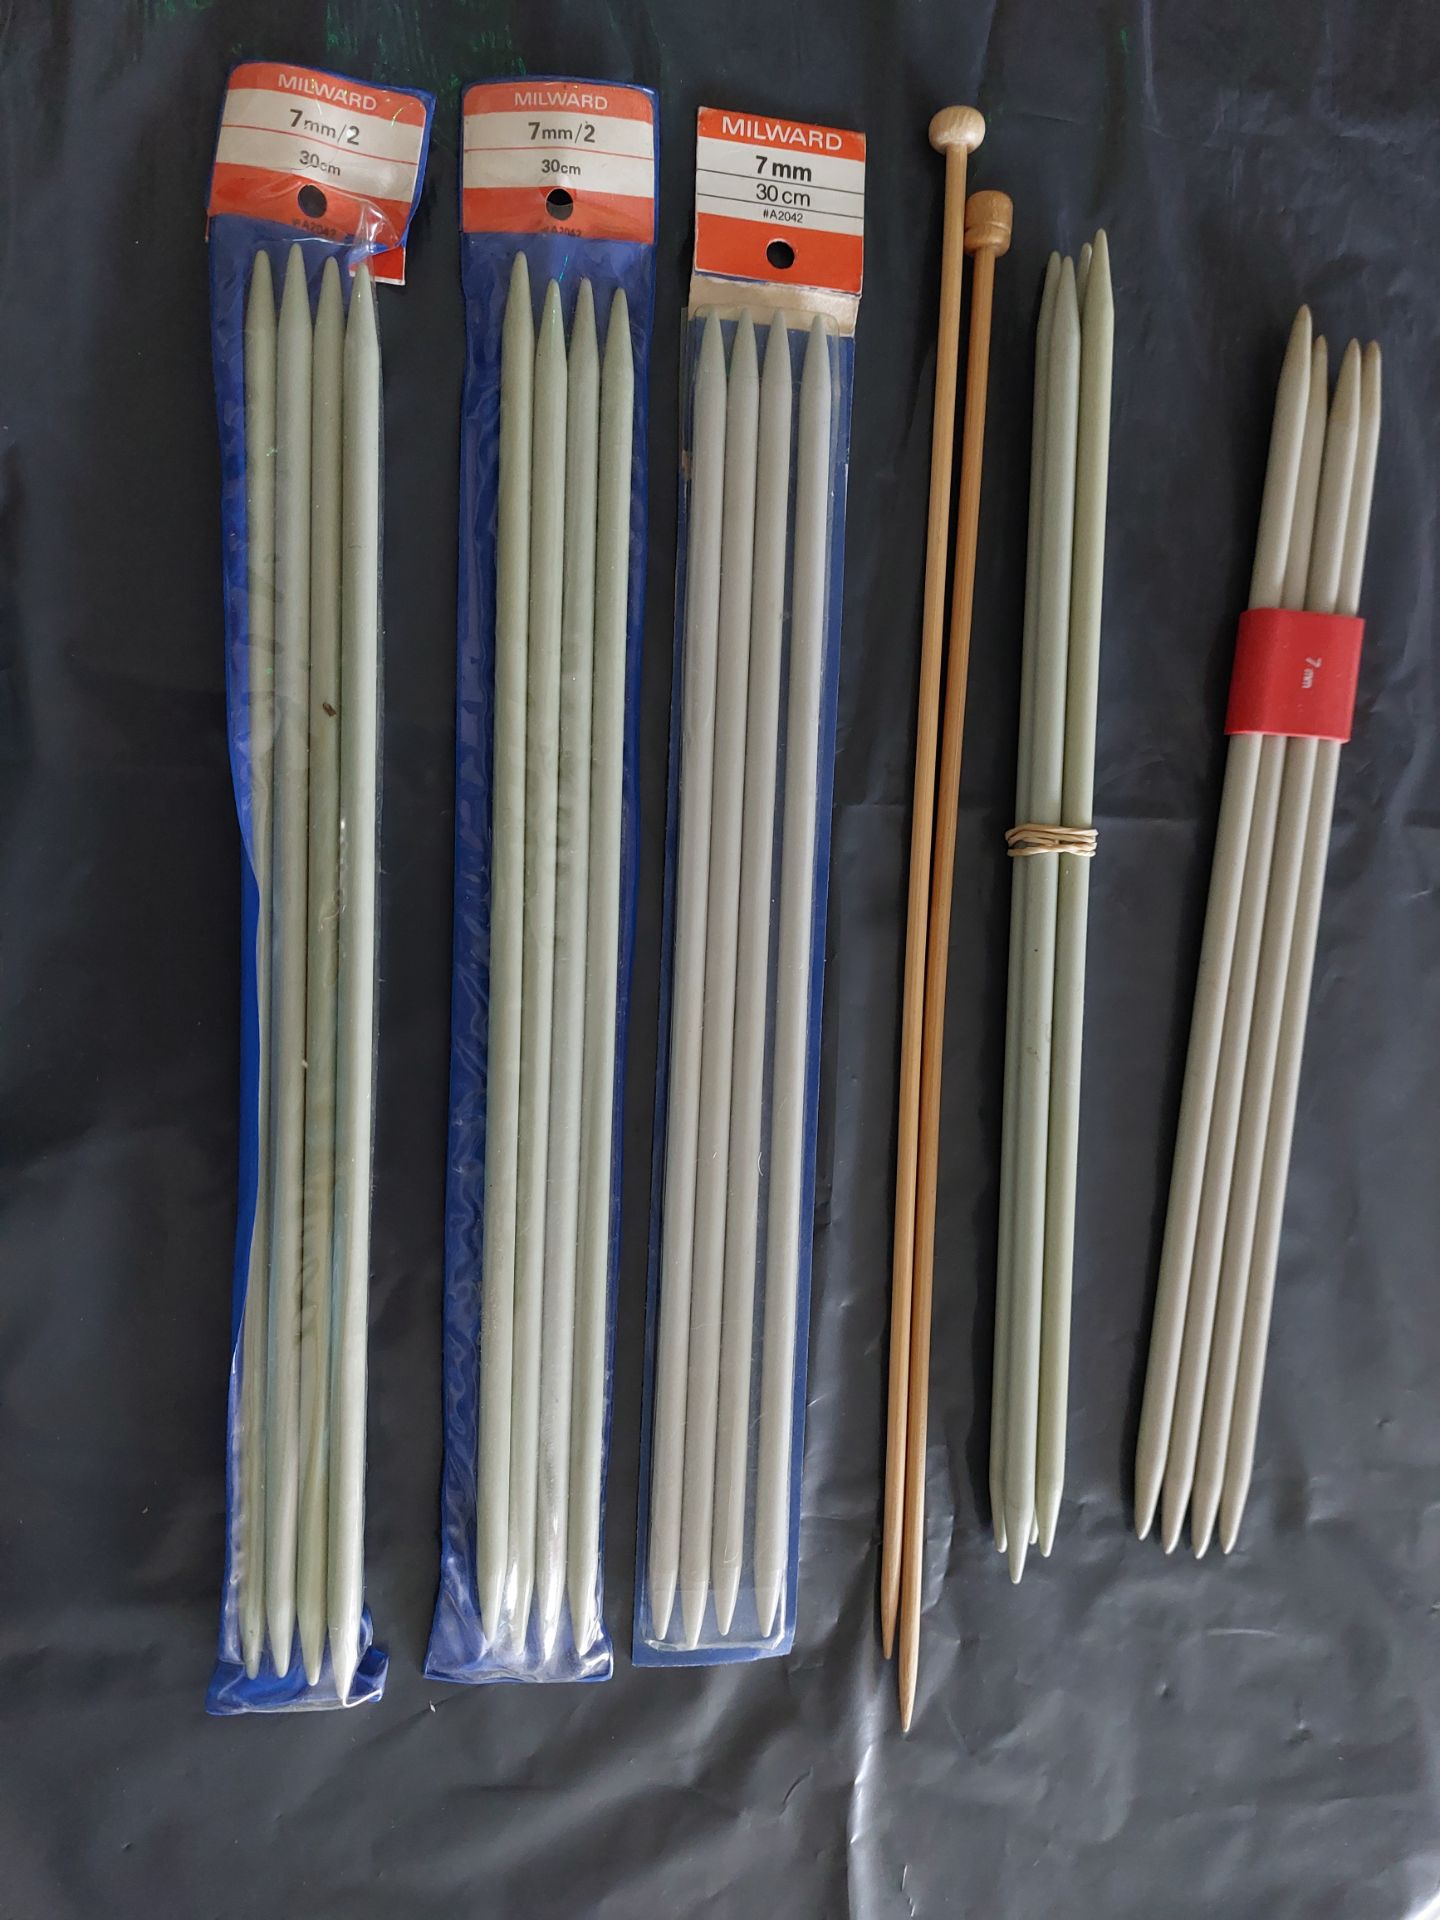 Assorted Knitting Needles and Pins - Box of 12 Prs Or Sets - Image 2 of 2